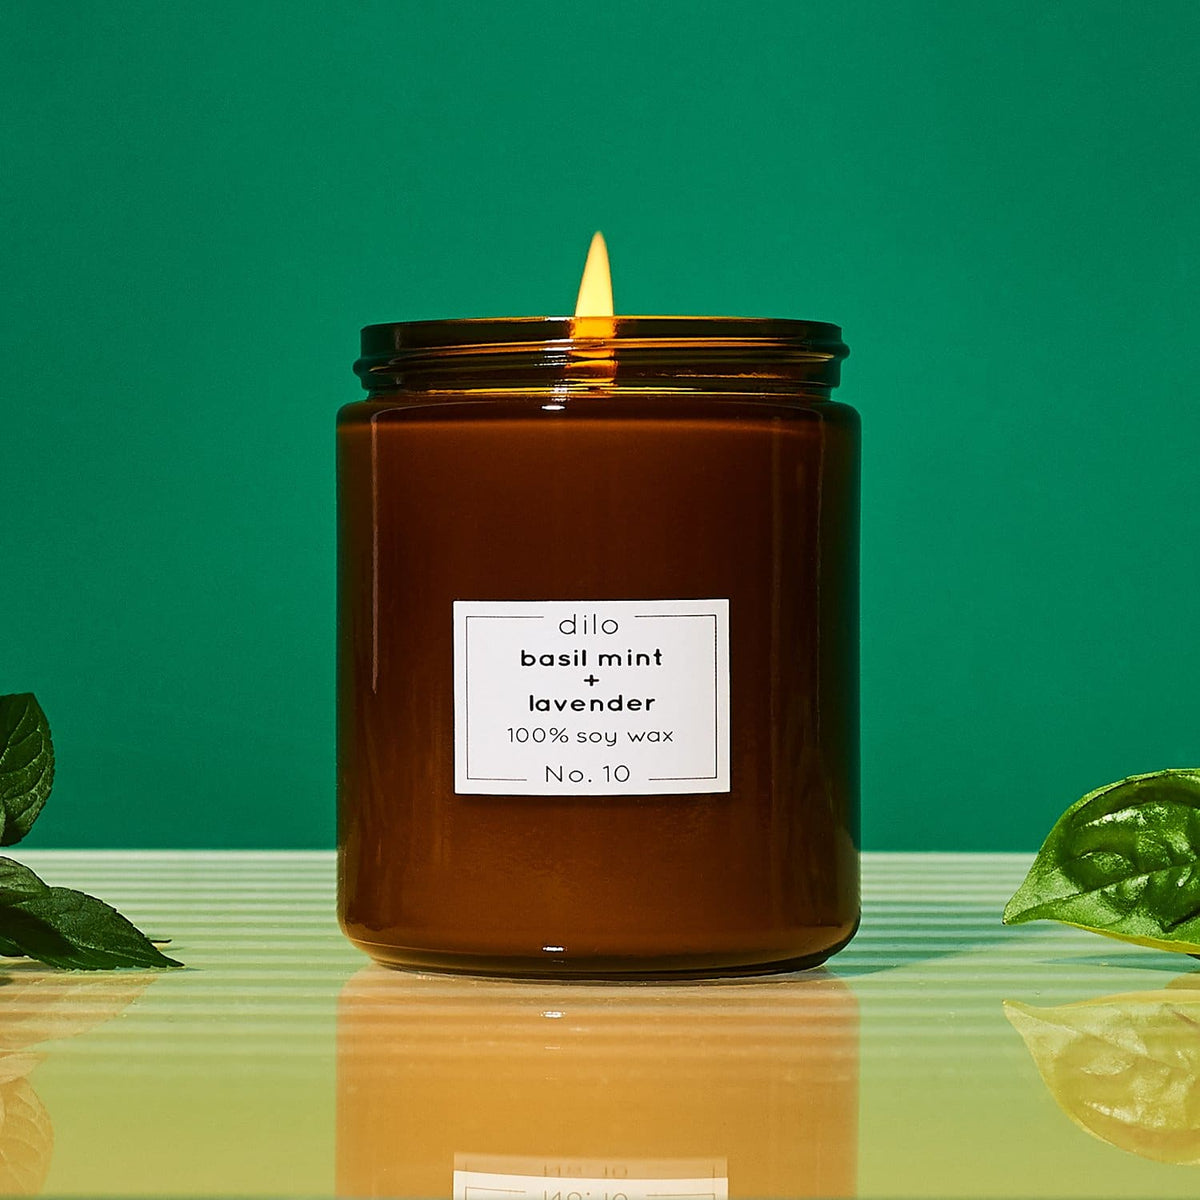 Dilo - Basil Mint and Lavender Candle Basil - best Seller - 